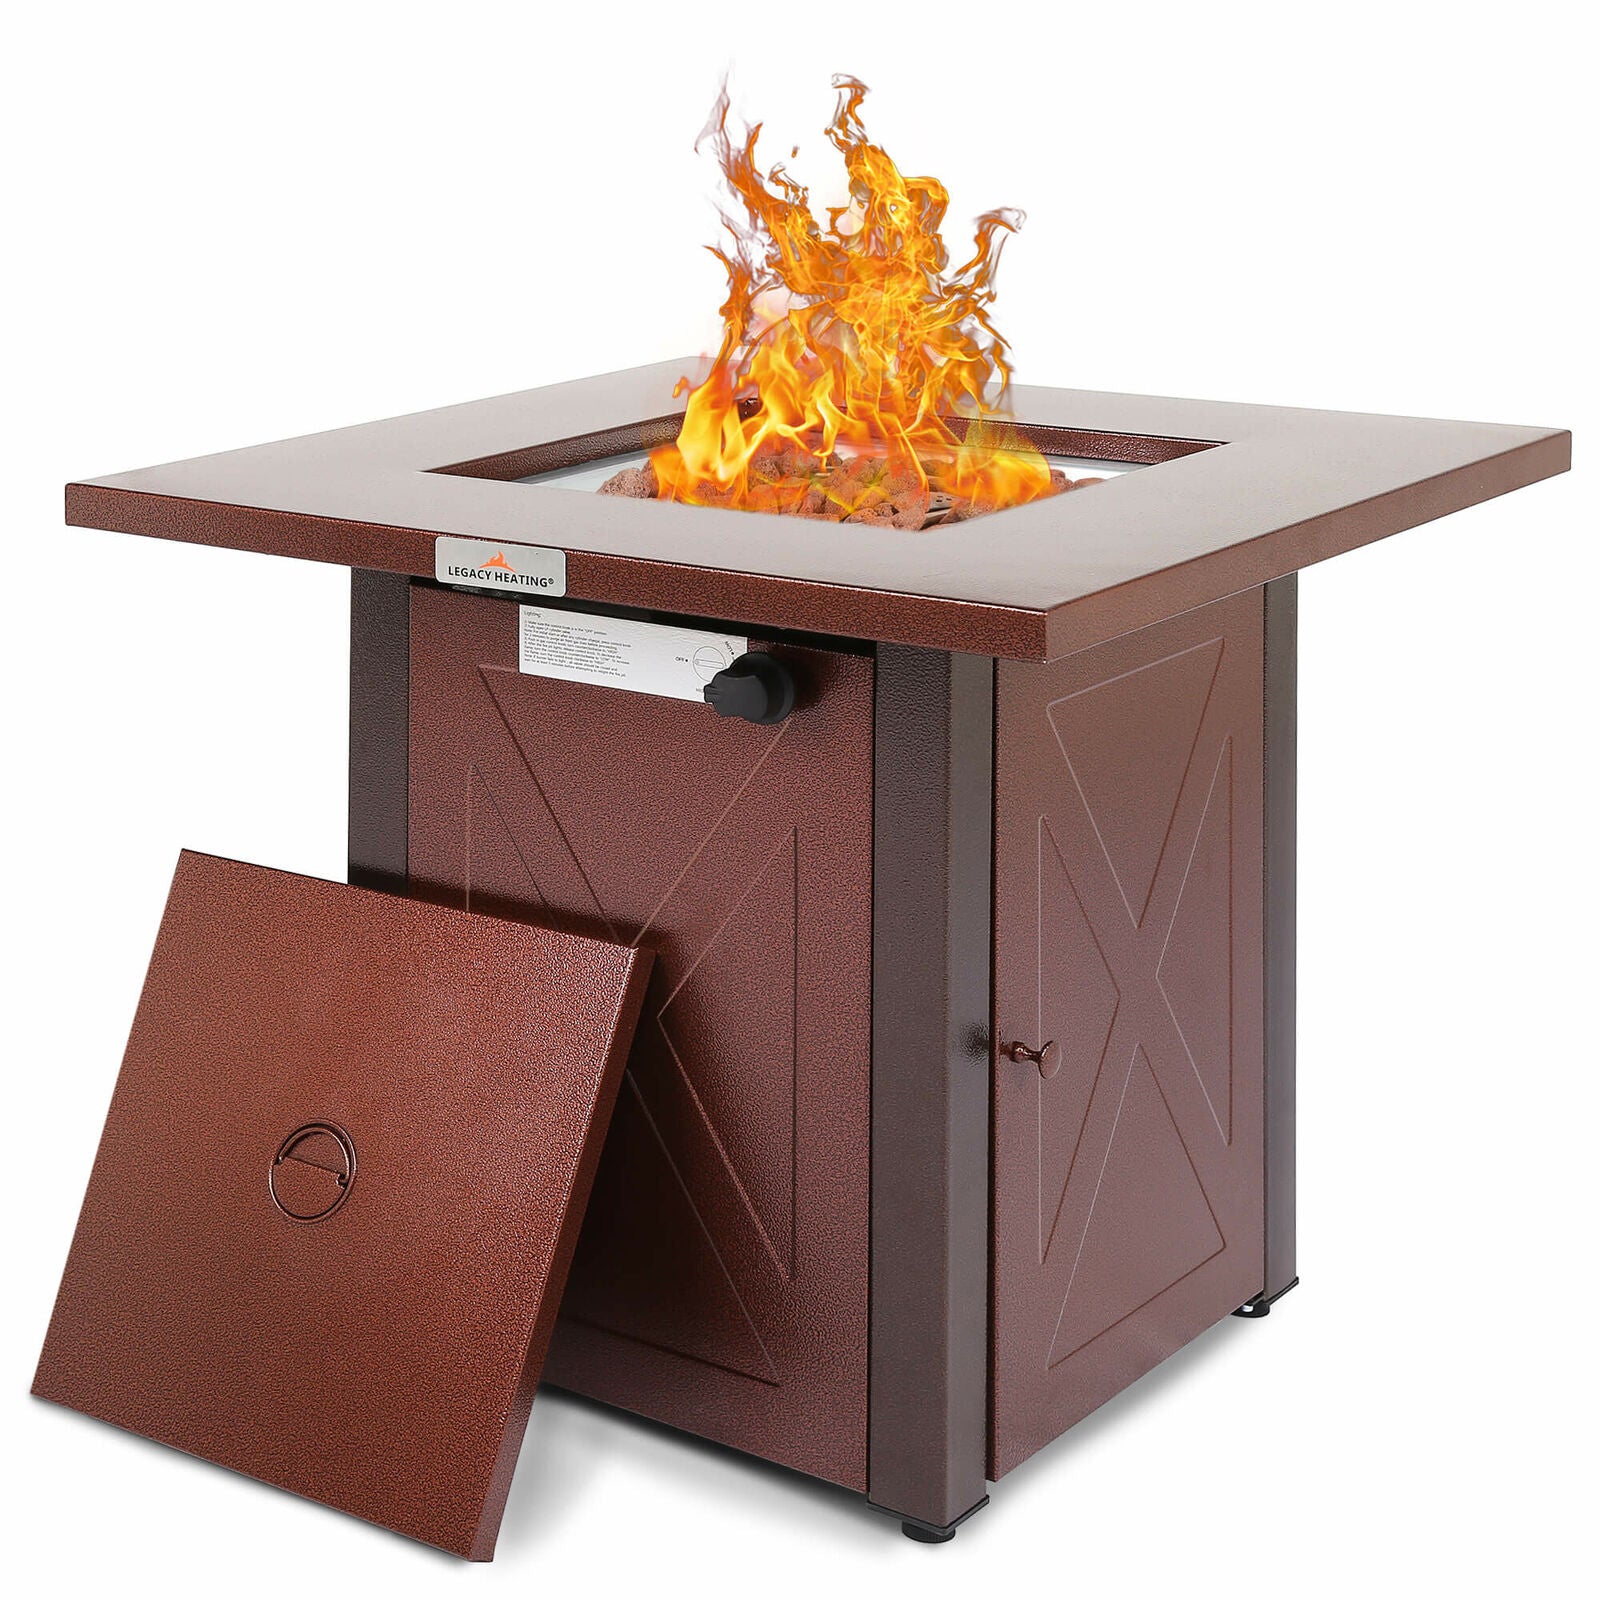 Legacy Heating 48,000 BTU Propane Outdoor Fire Pit Table with Lava Stones Wood Look New